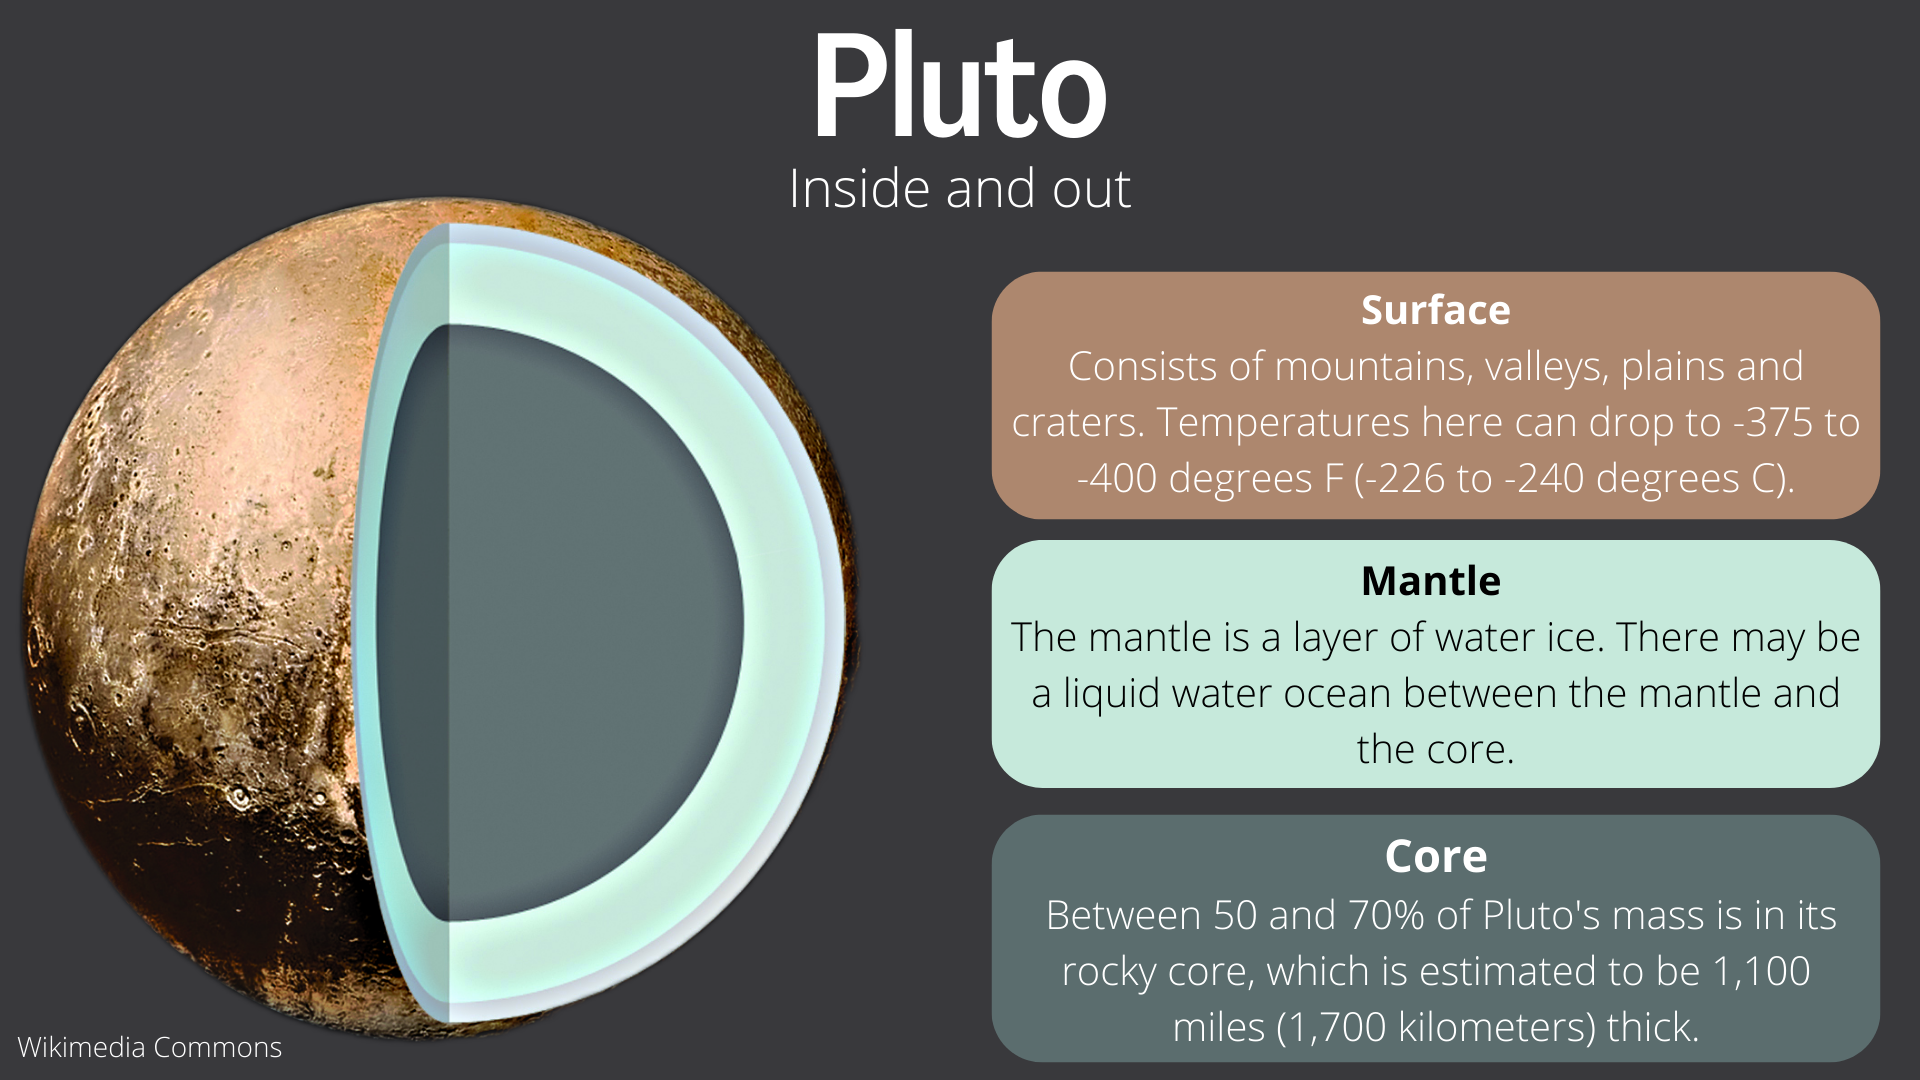 Graphic illustrating the the surface, mantle and core of Pluto. A graphic of Pluto on the left shows Pluto's possible interior layers.